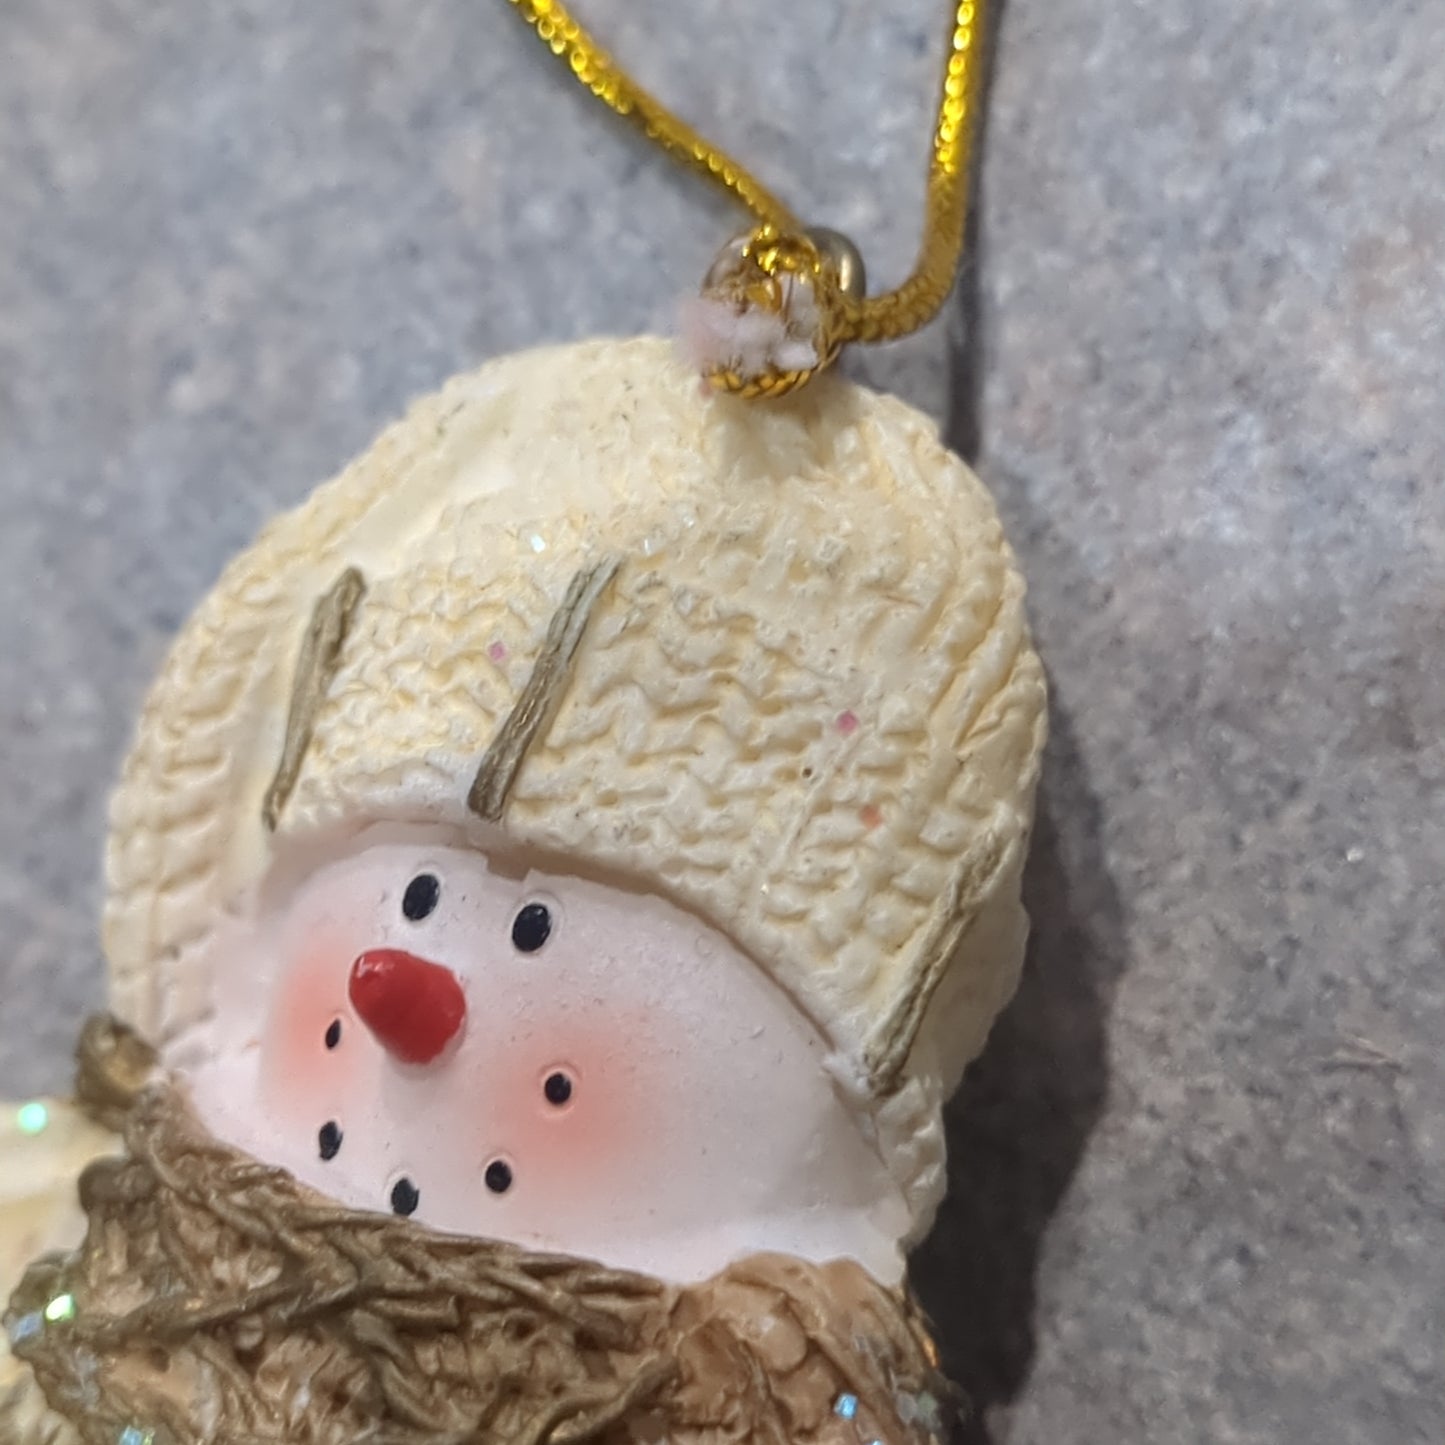 Polycrylic snowman ornament with an ice skate yellow